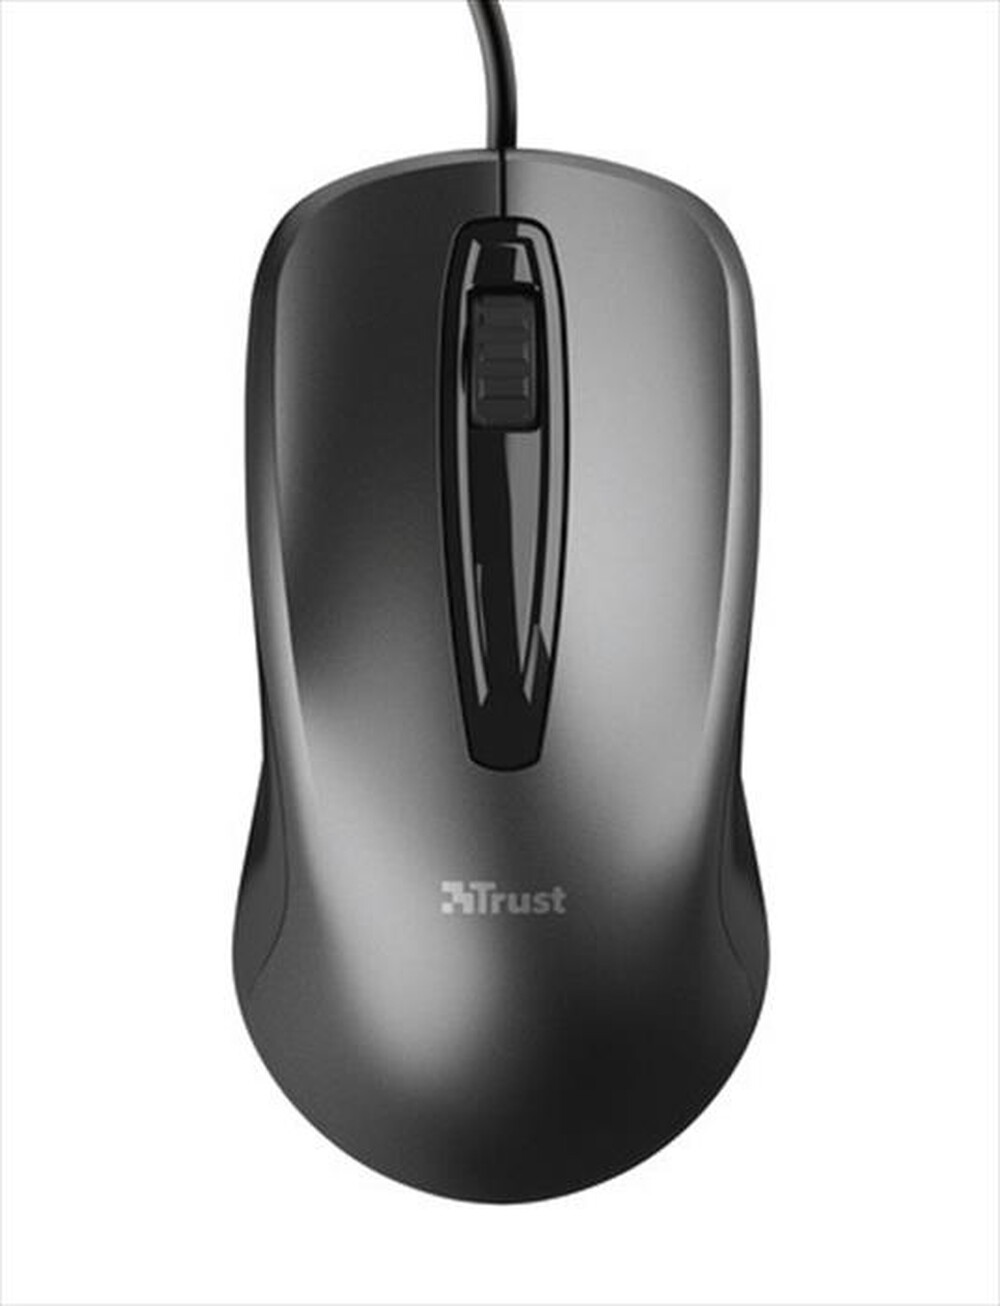 "TRUST - CARVE WIRED MOUSE - Black"